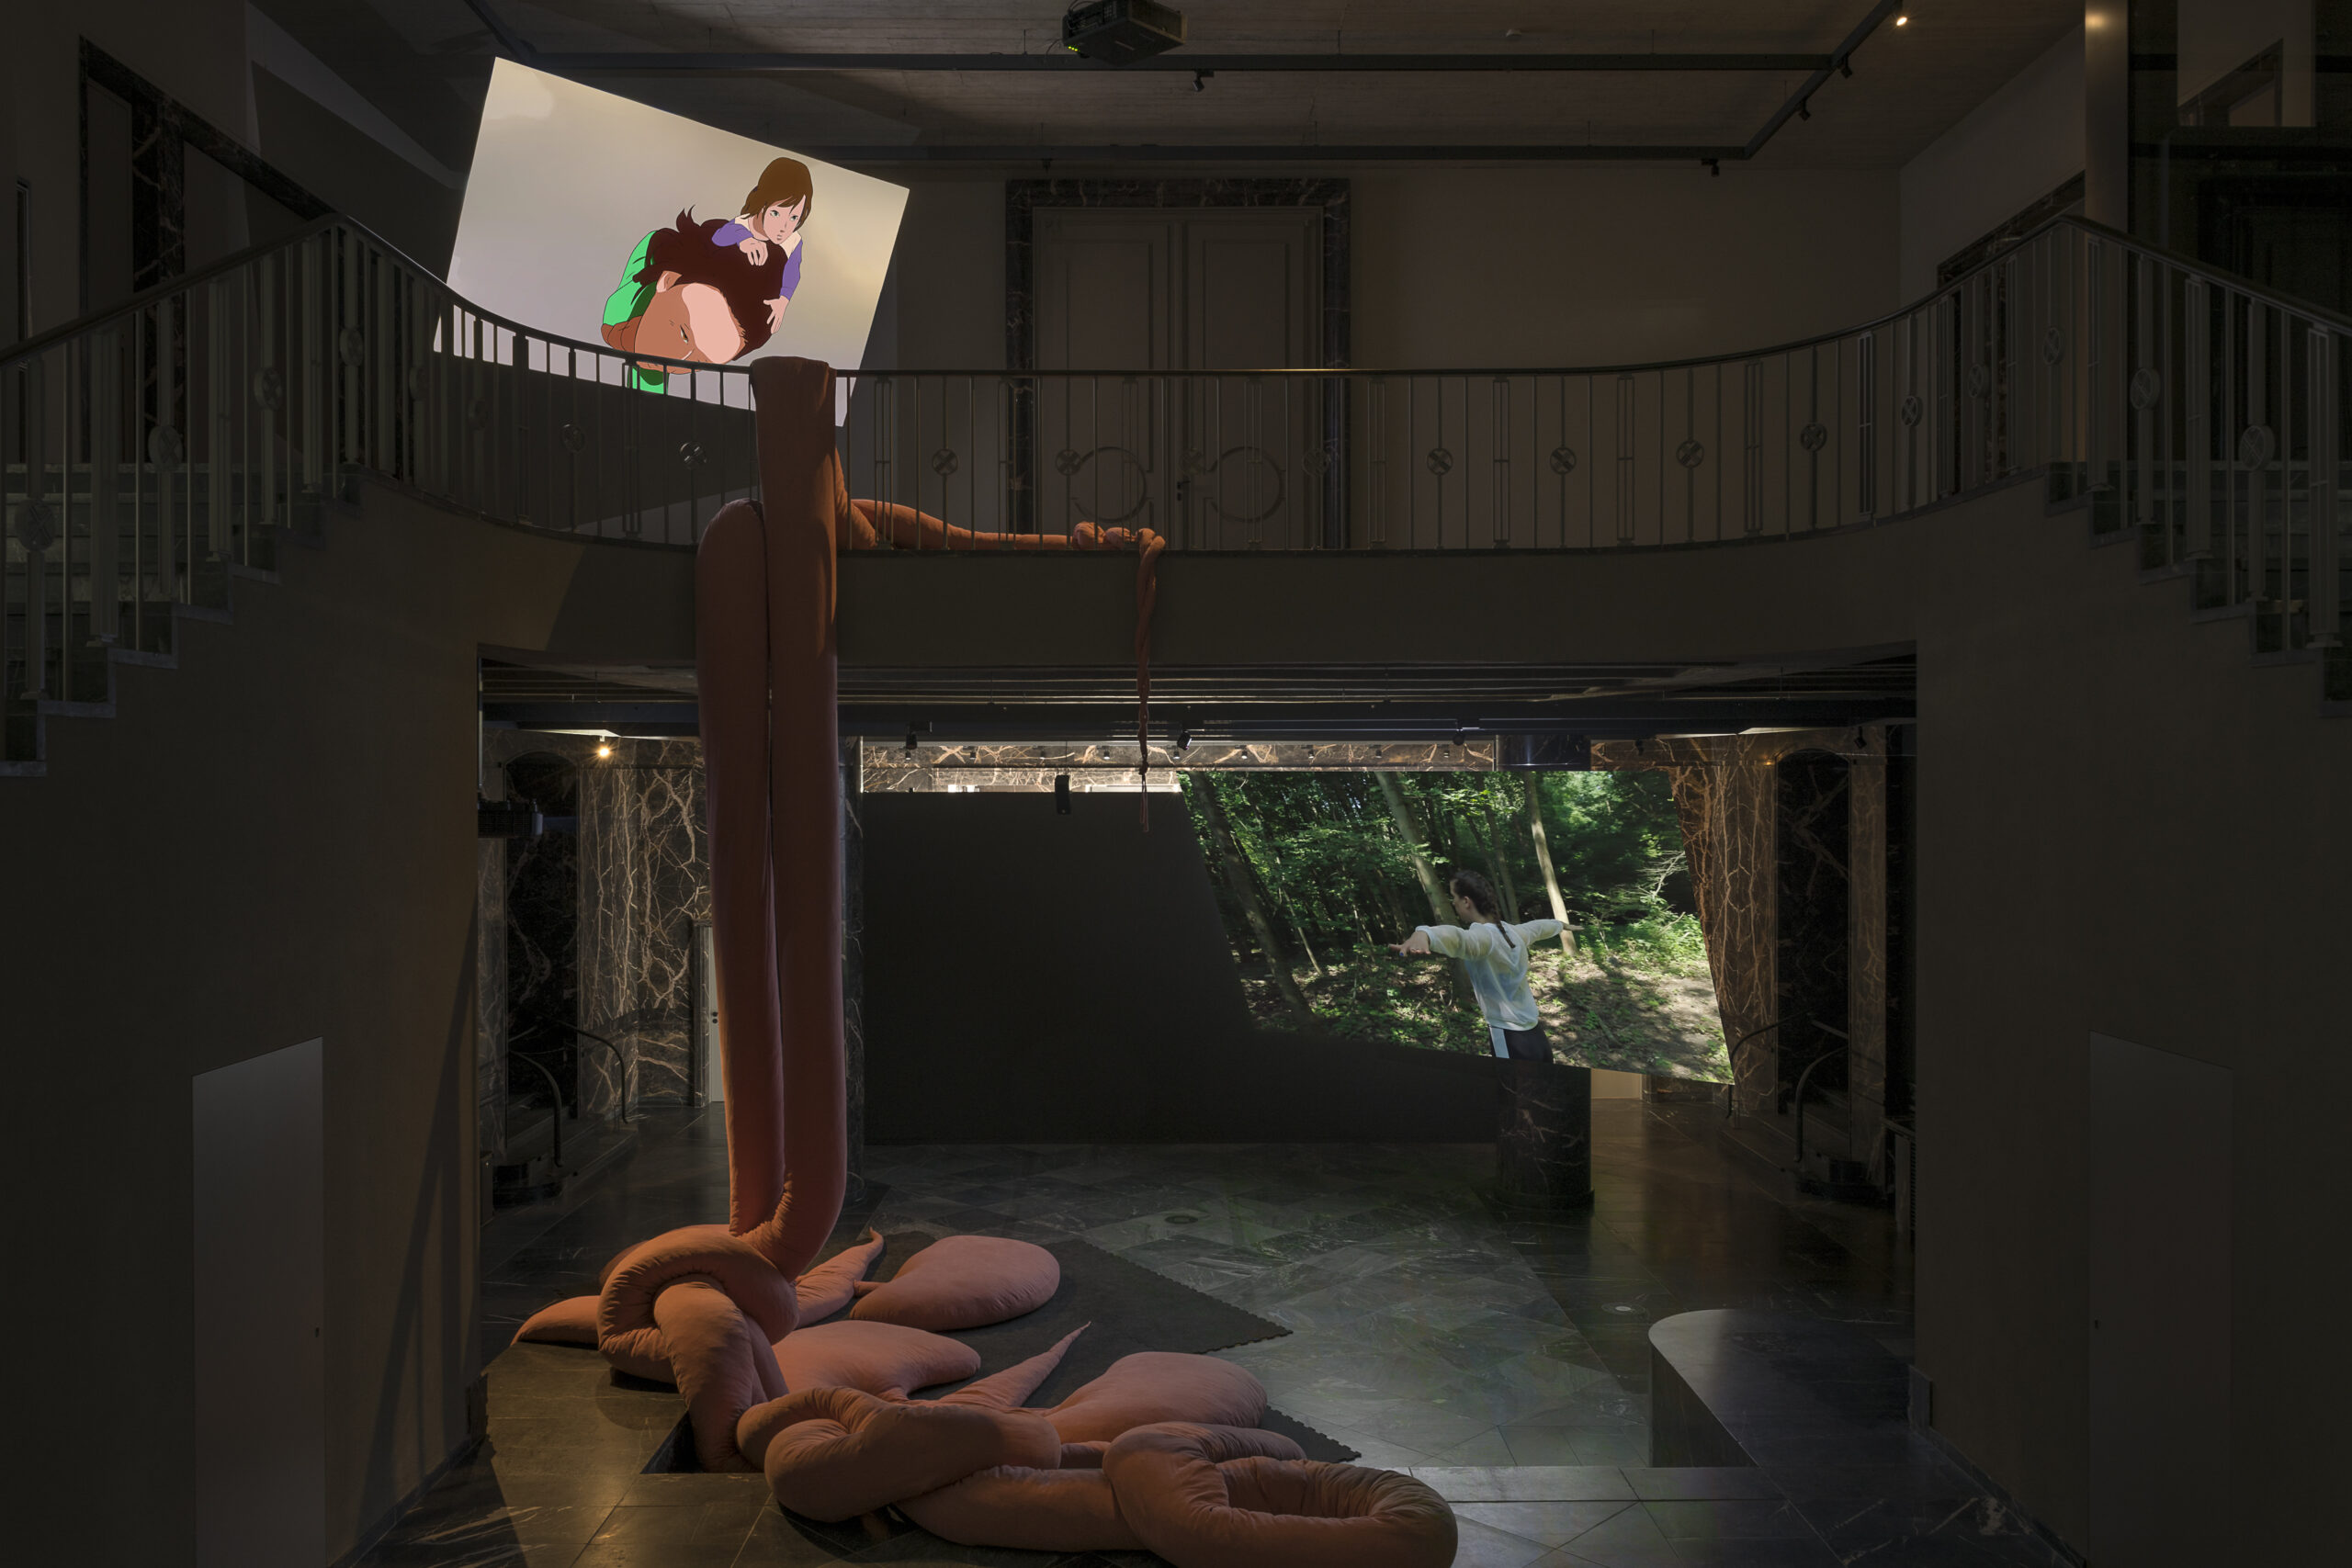 a two-storey exhibition space with large video projections and a plush tentacle-like sculpture in the middle